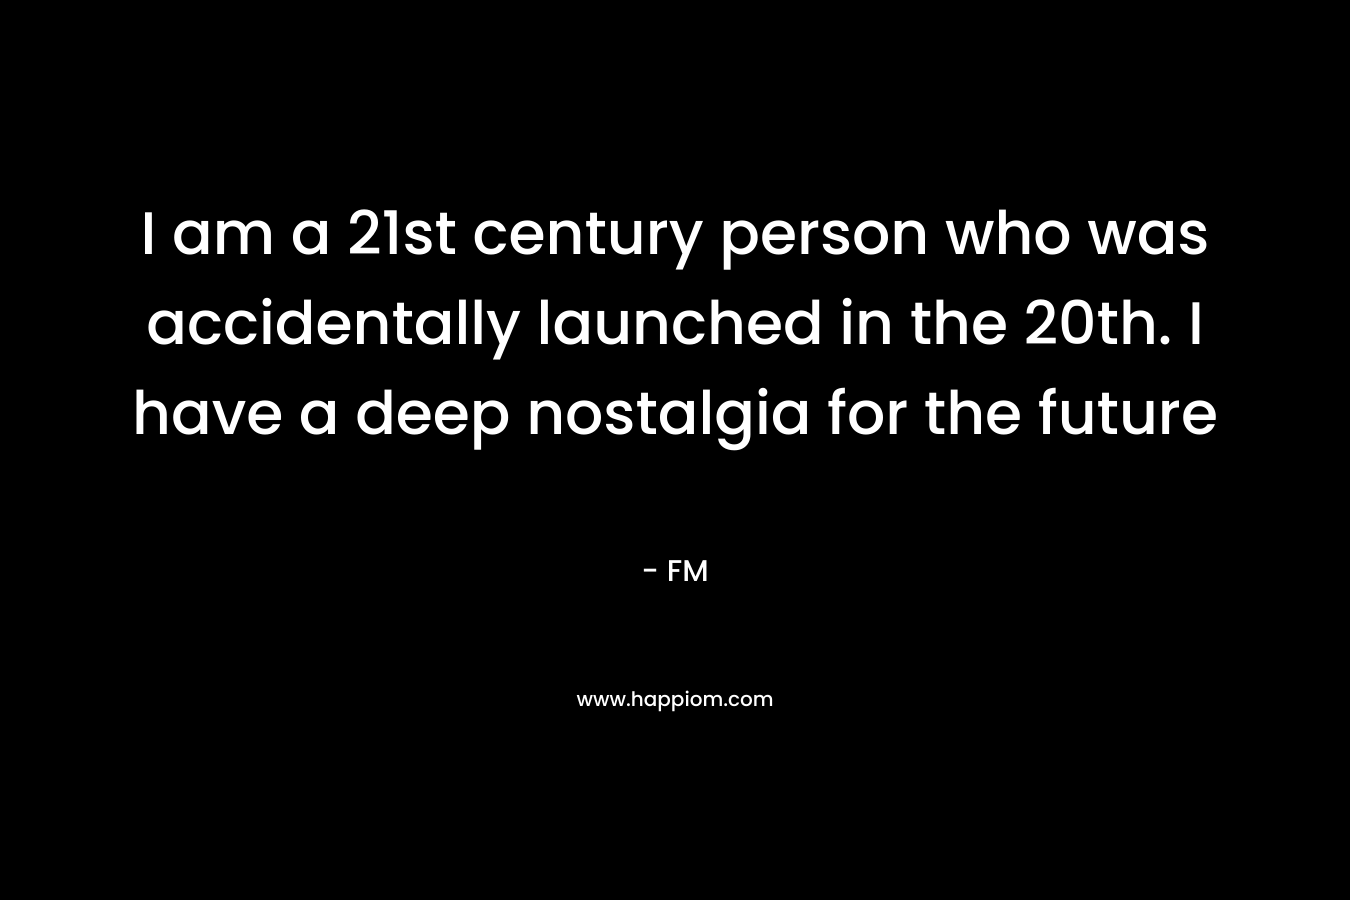 I am a 21st century person who was accidentally launched in the 20th. I have a deep nostalgia for the future – FM